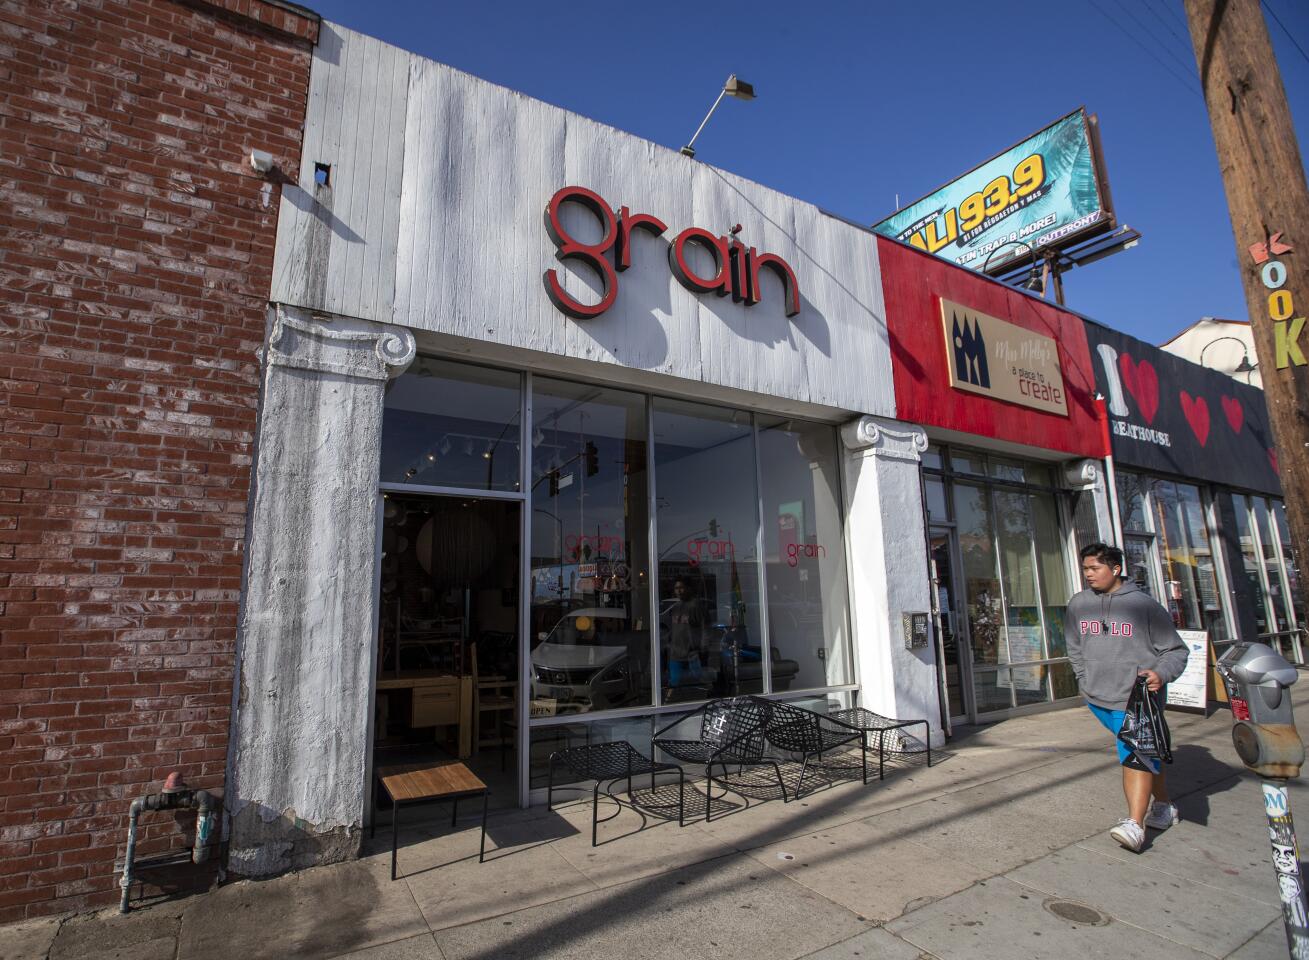 Vintage outdoor furnishings at Grain offer a welcome place to sit in Atwater Village.